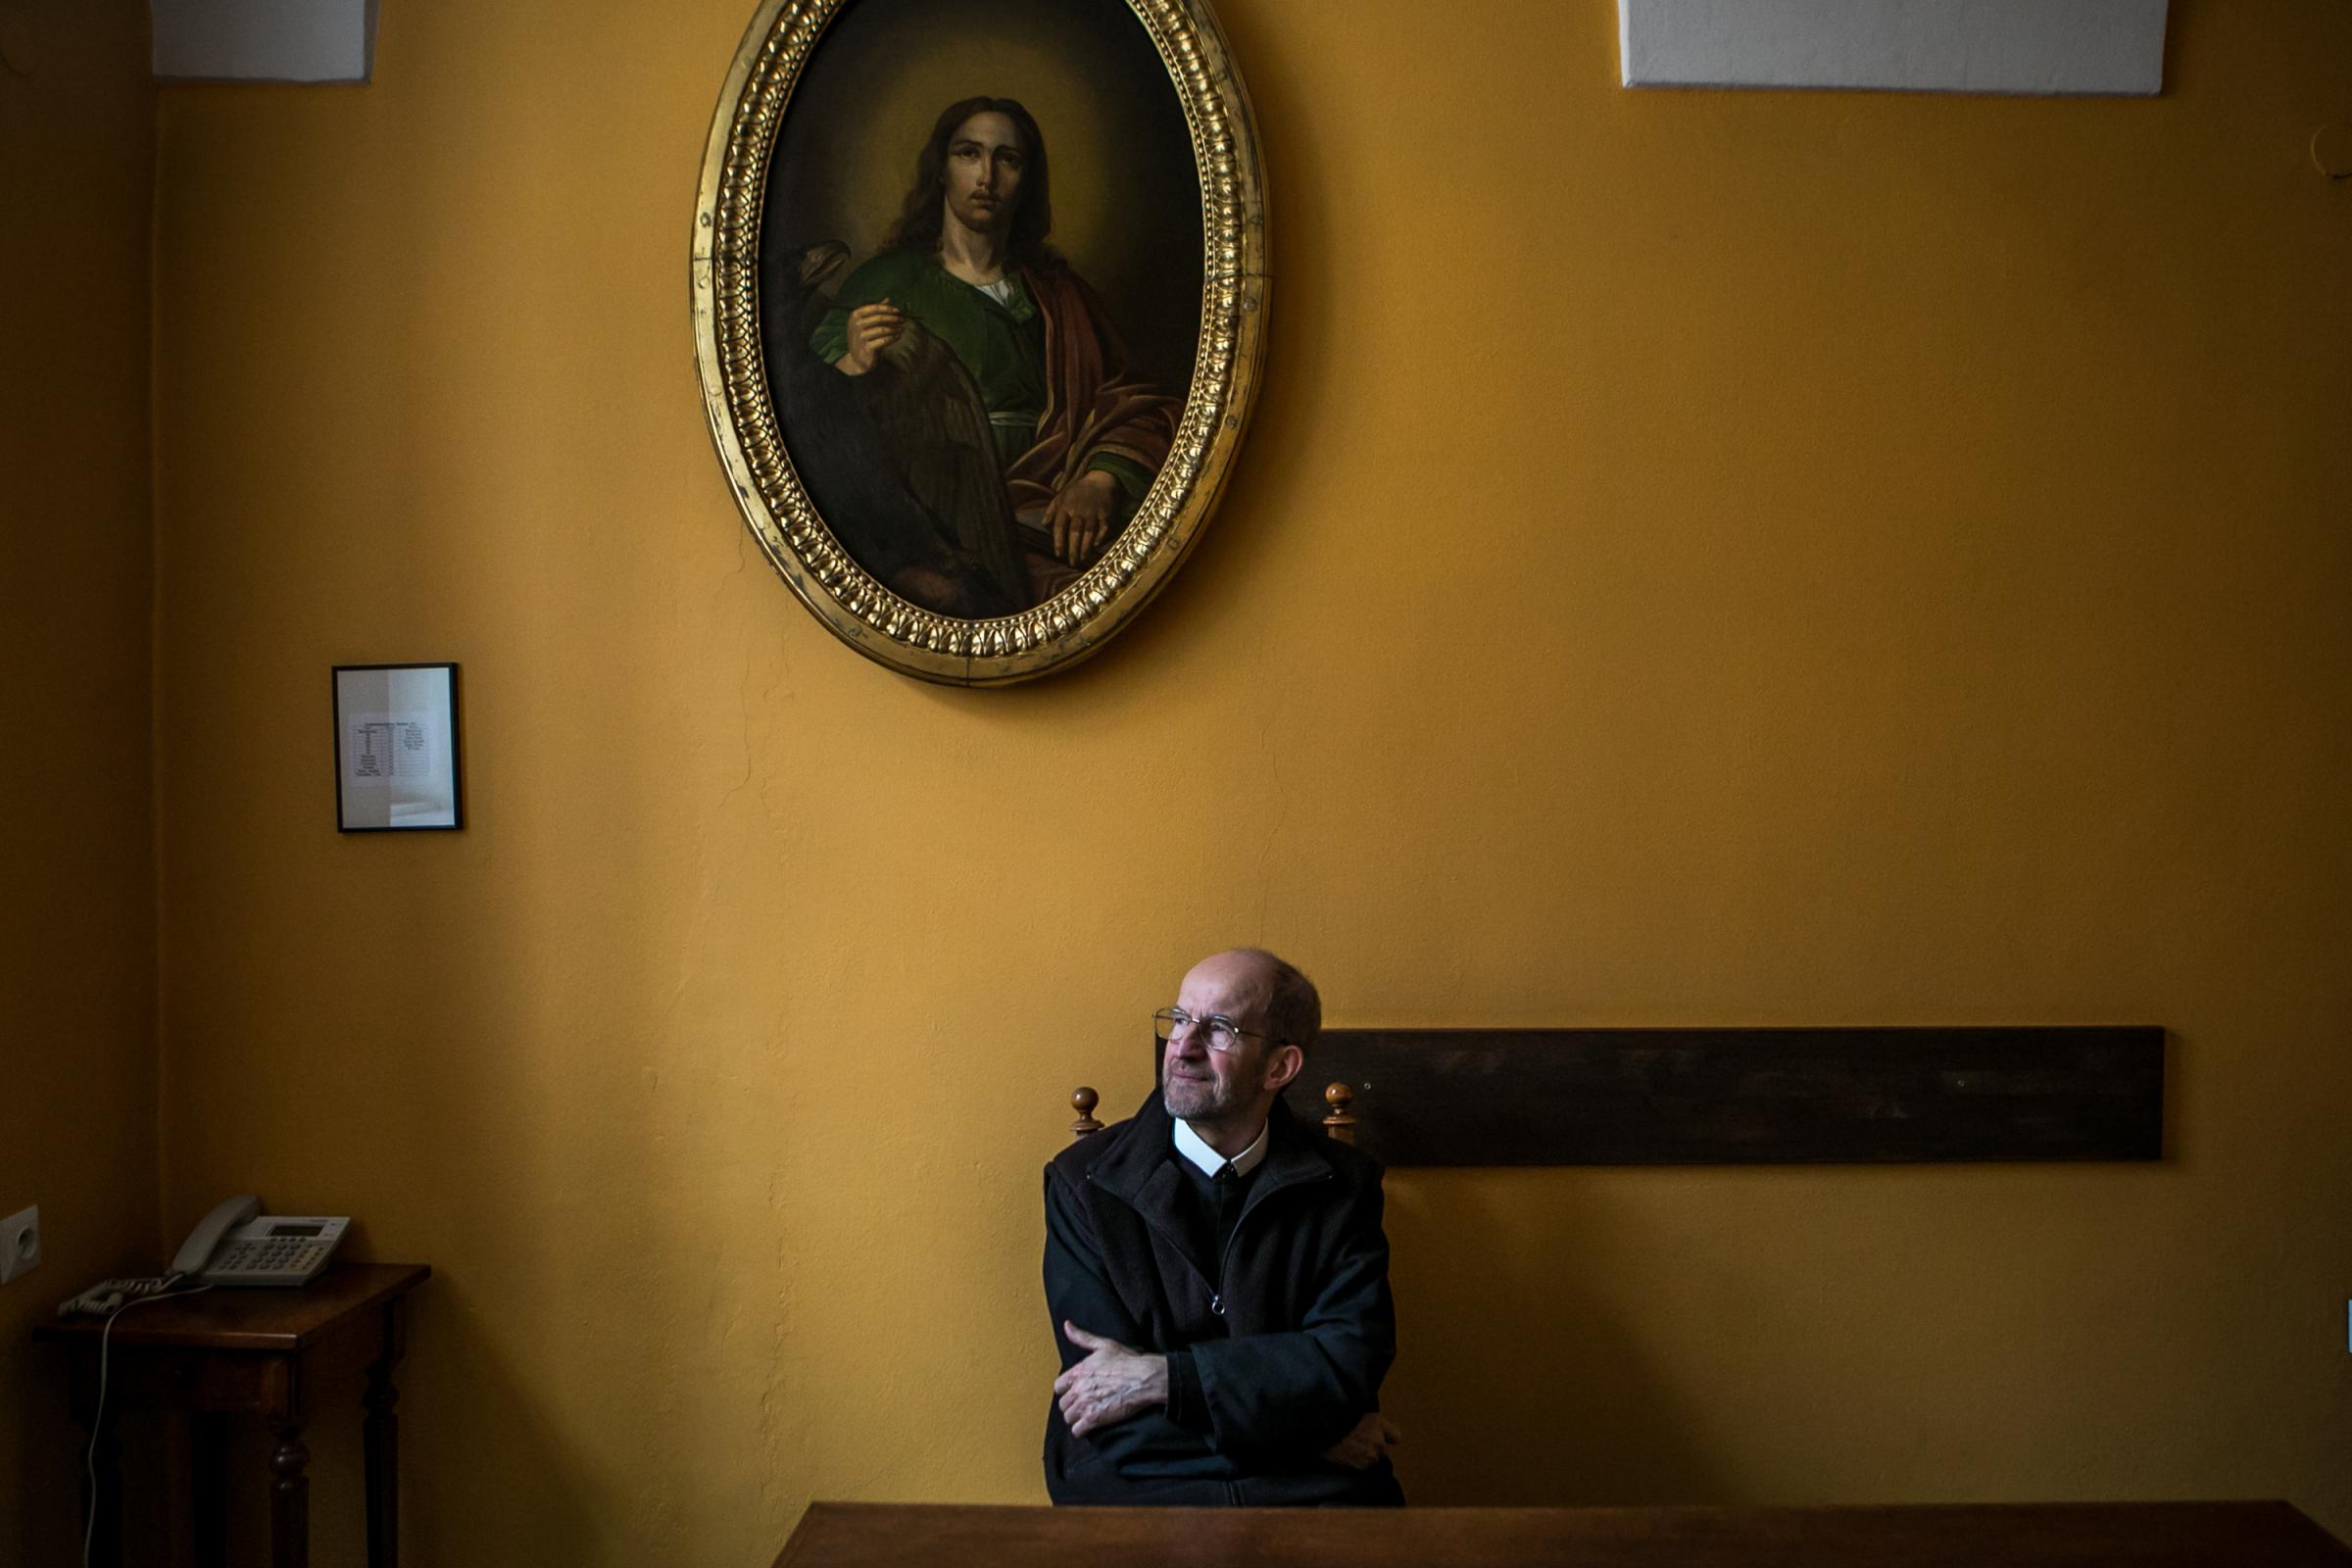  Piotr Kuszka, the parish priest in Archdiocese of Przemysl &ndash; Warsaw of the Greek Catholic Church in Poland. The priest and his parish are helping migrants from Ukraine. The help is spiritual, psychological, financial, if someone is uninsured and needs an operation, the priest announces a collection of money among the parishioners. In the corridor of the church, there is also a bulletin board with jobs, rooms for rent, which is often the first point of call for Ukrainian migrants. But the parish is not prepared to receive more Ukrainians, in case of war. 15.02.2022 Warsaw, Poland. 